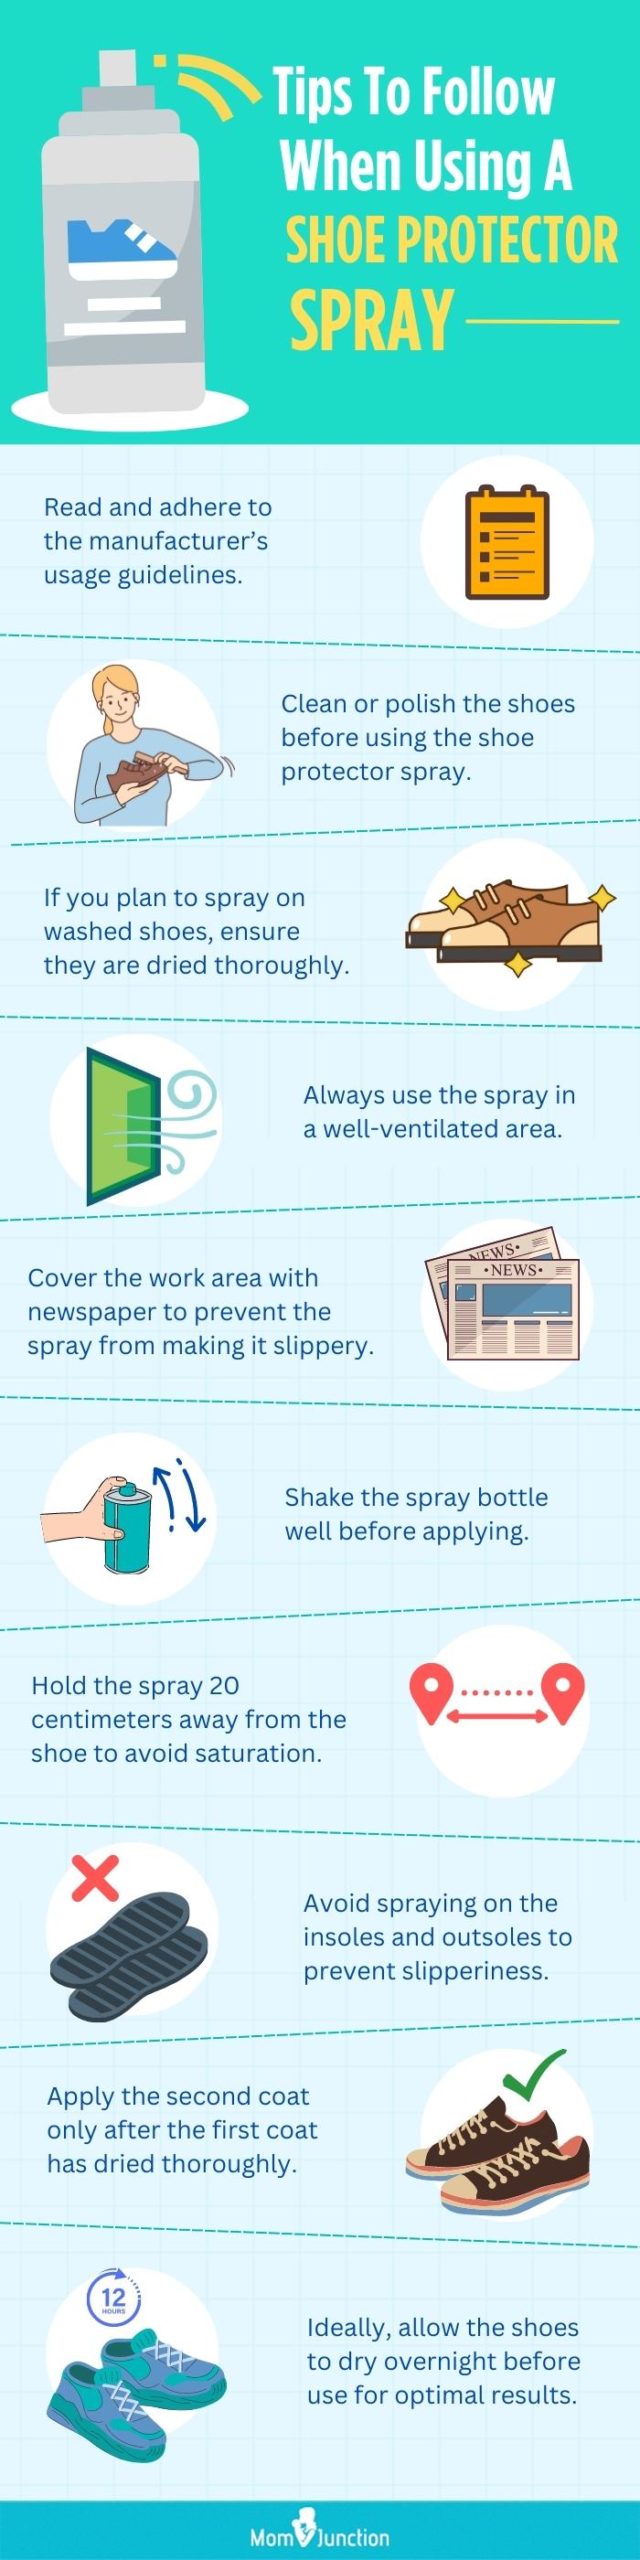 Tips To Follow When Using A Shoe Protector Spray (infographic)